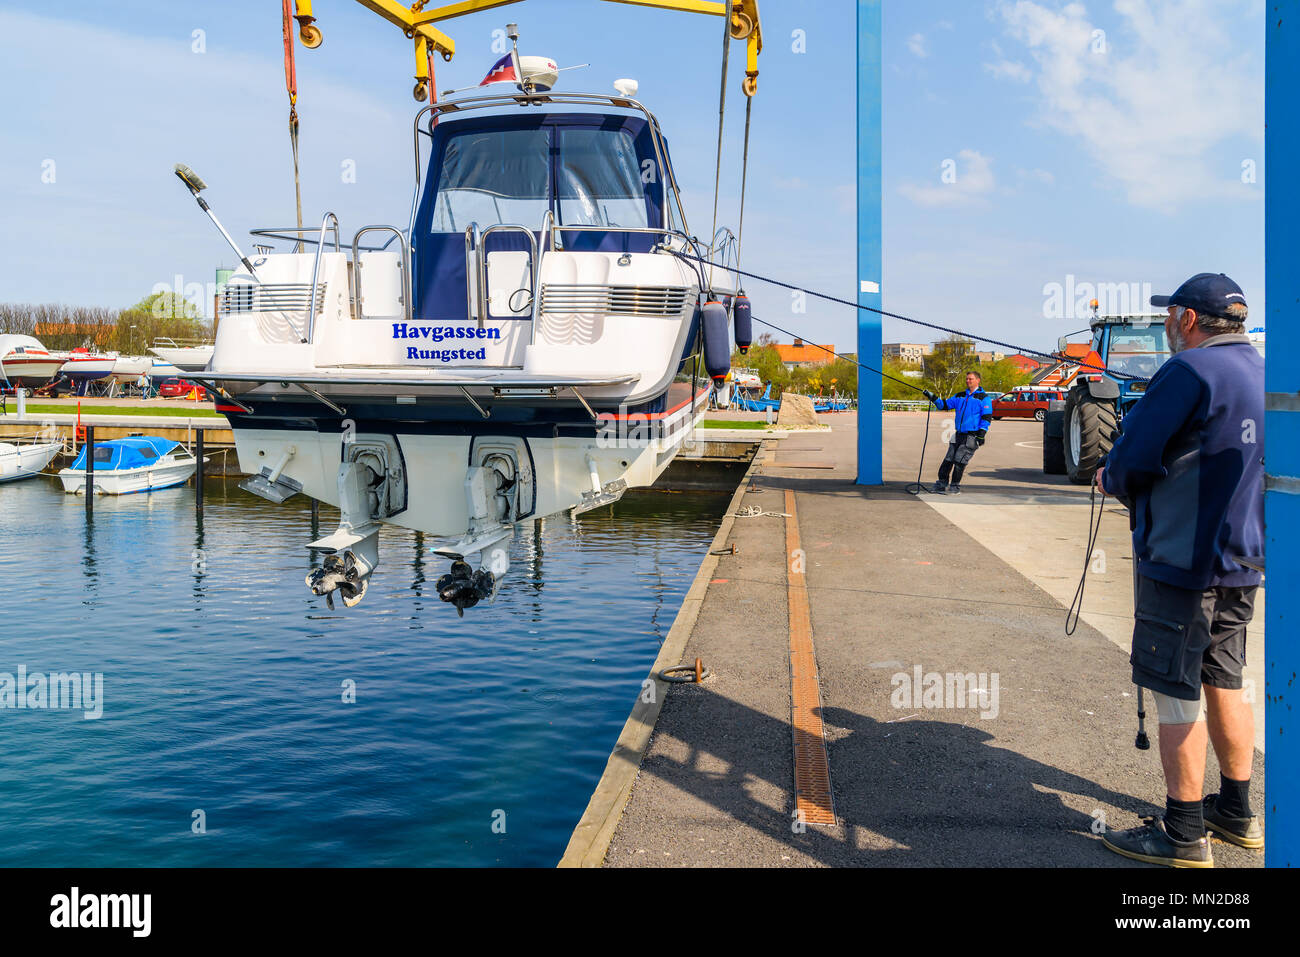 Hoganas, Sweden - April 30, 2018: Documentary of everyday life and place. The launching of a motorboat using a harbor crane. Stock Photo